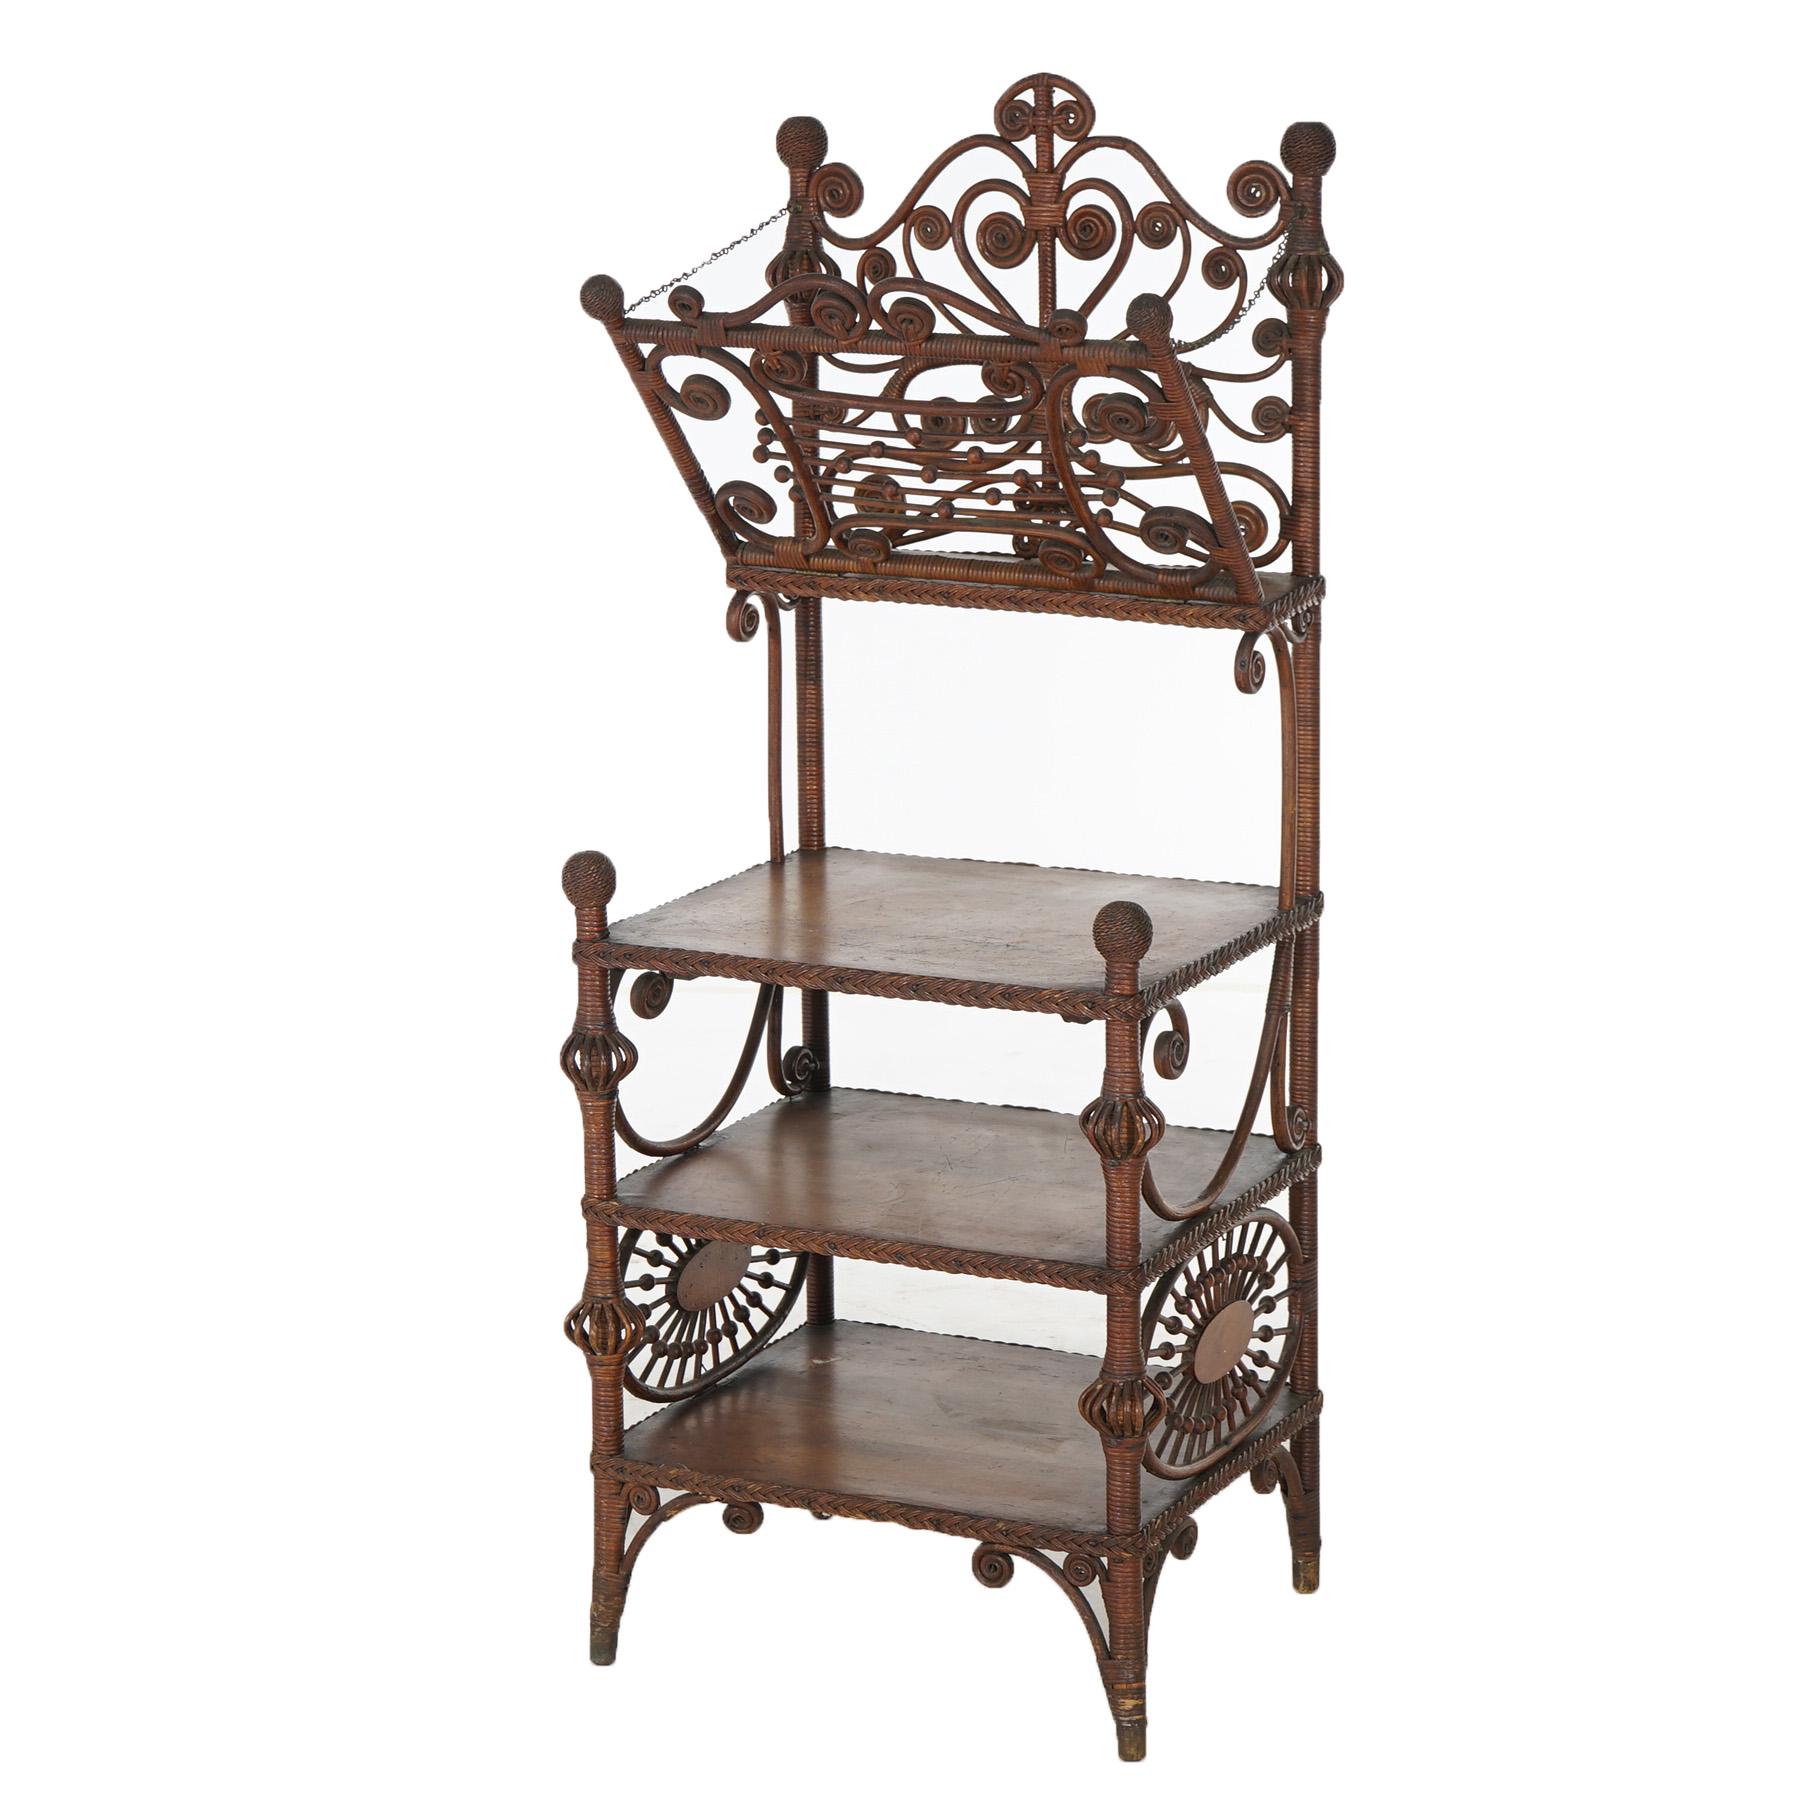 An antique Heywood Wakefield magazine stand offers wicker stick and ball construction with scroll form frame, upper portfolio, and three shelves, c1890

Measures - 48.25